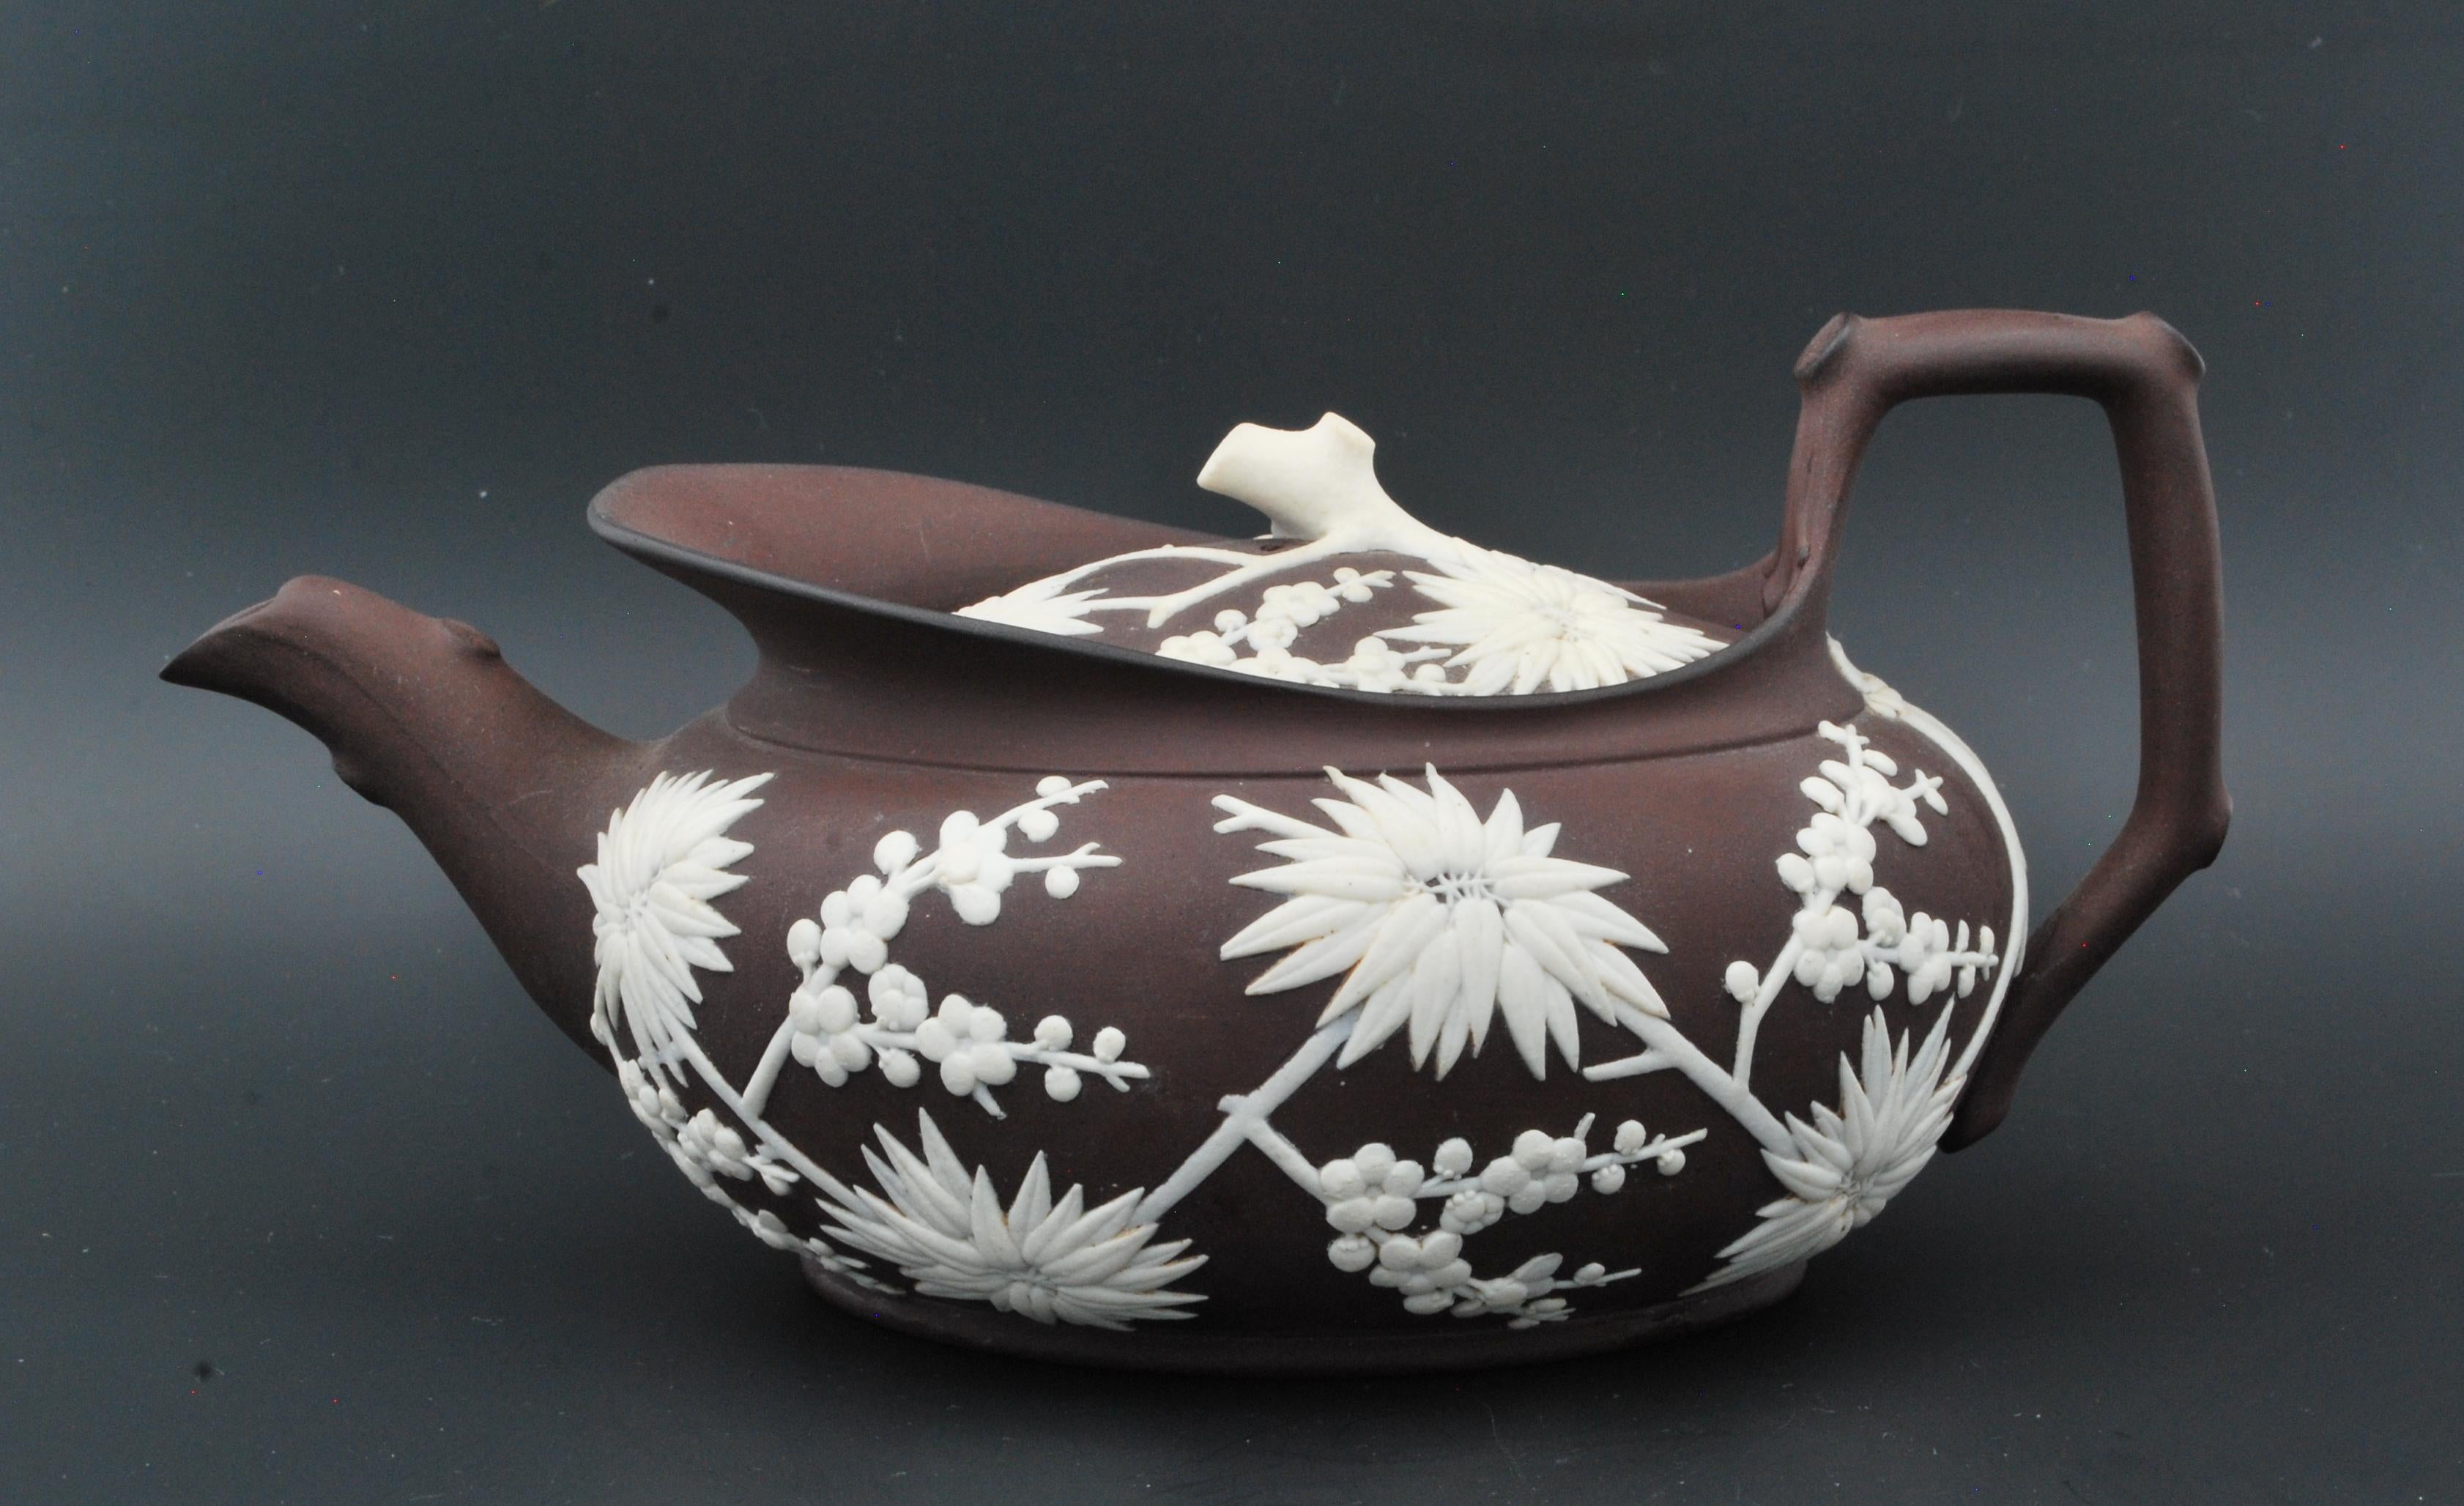 Low oval teapot in ‘chocolate porcelain’, as Wedgwood called this brown stoneware. White applied decoration, to create the appearance of a Japanese bronze.